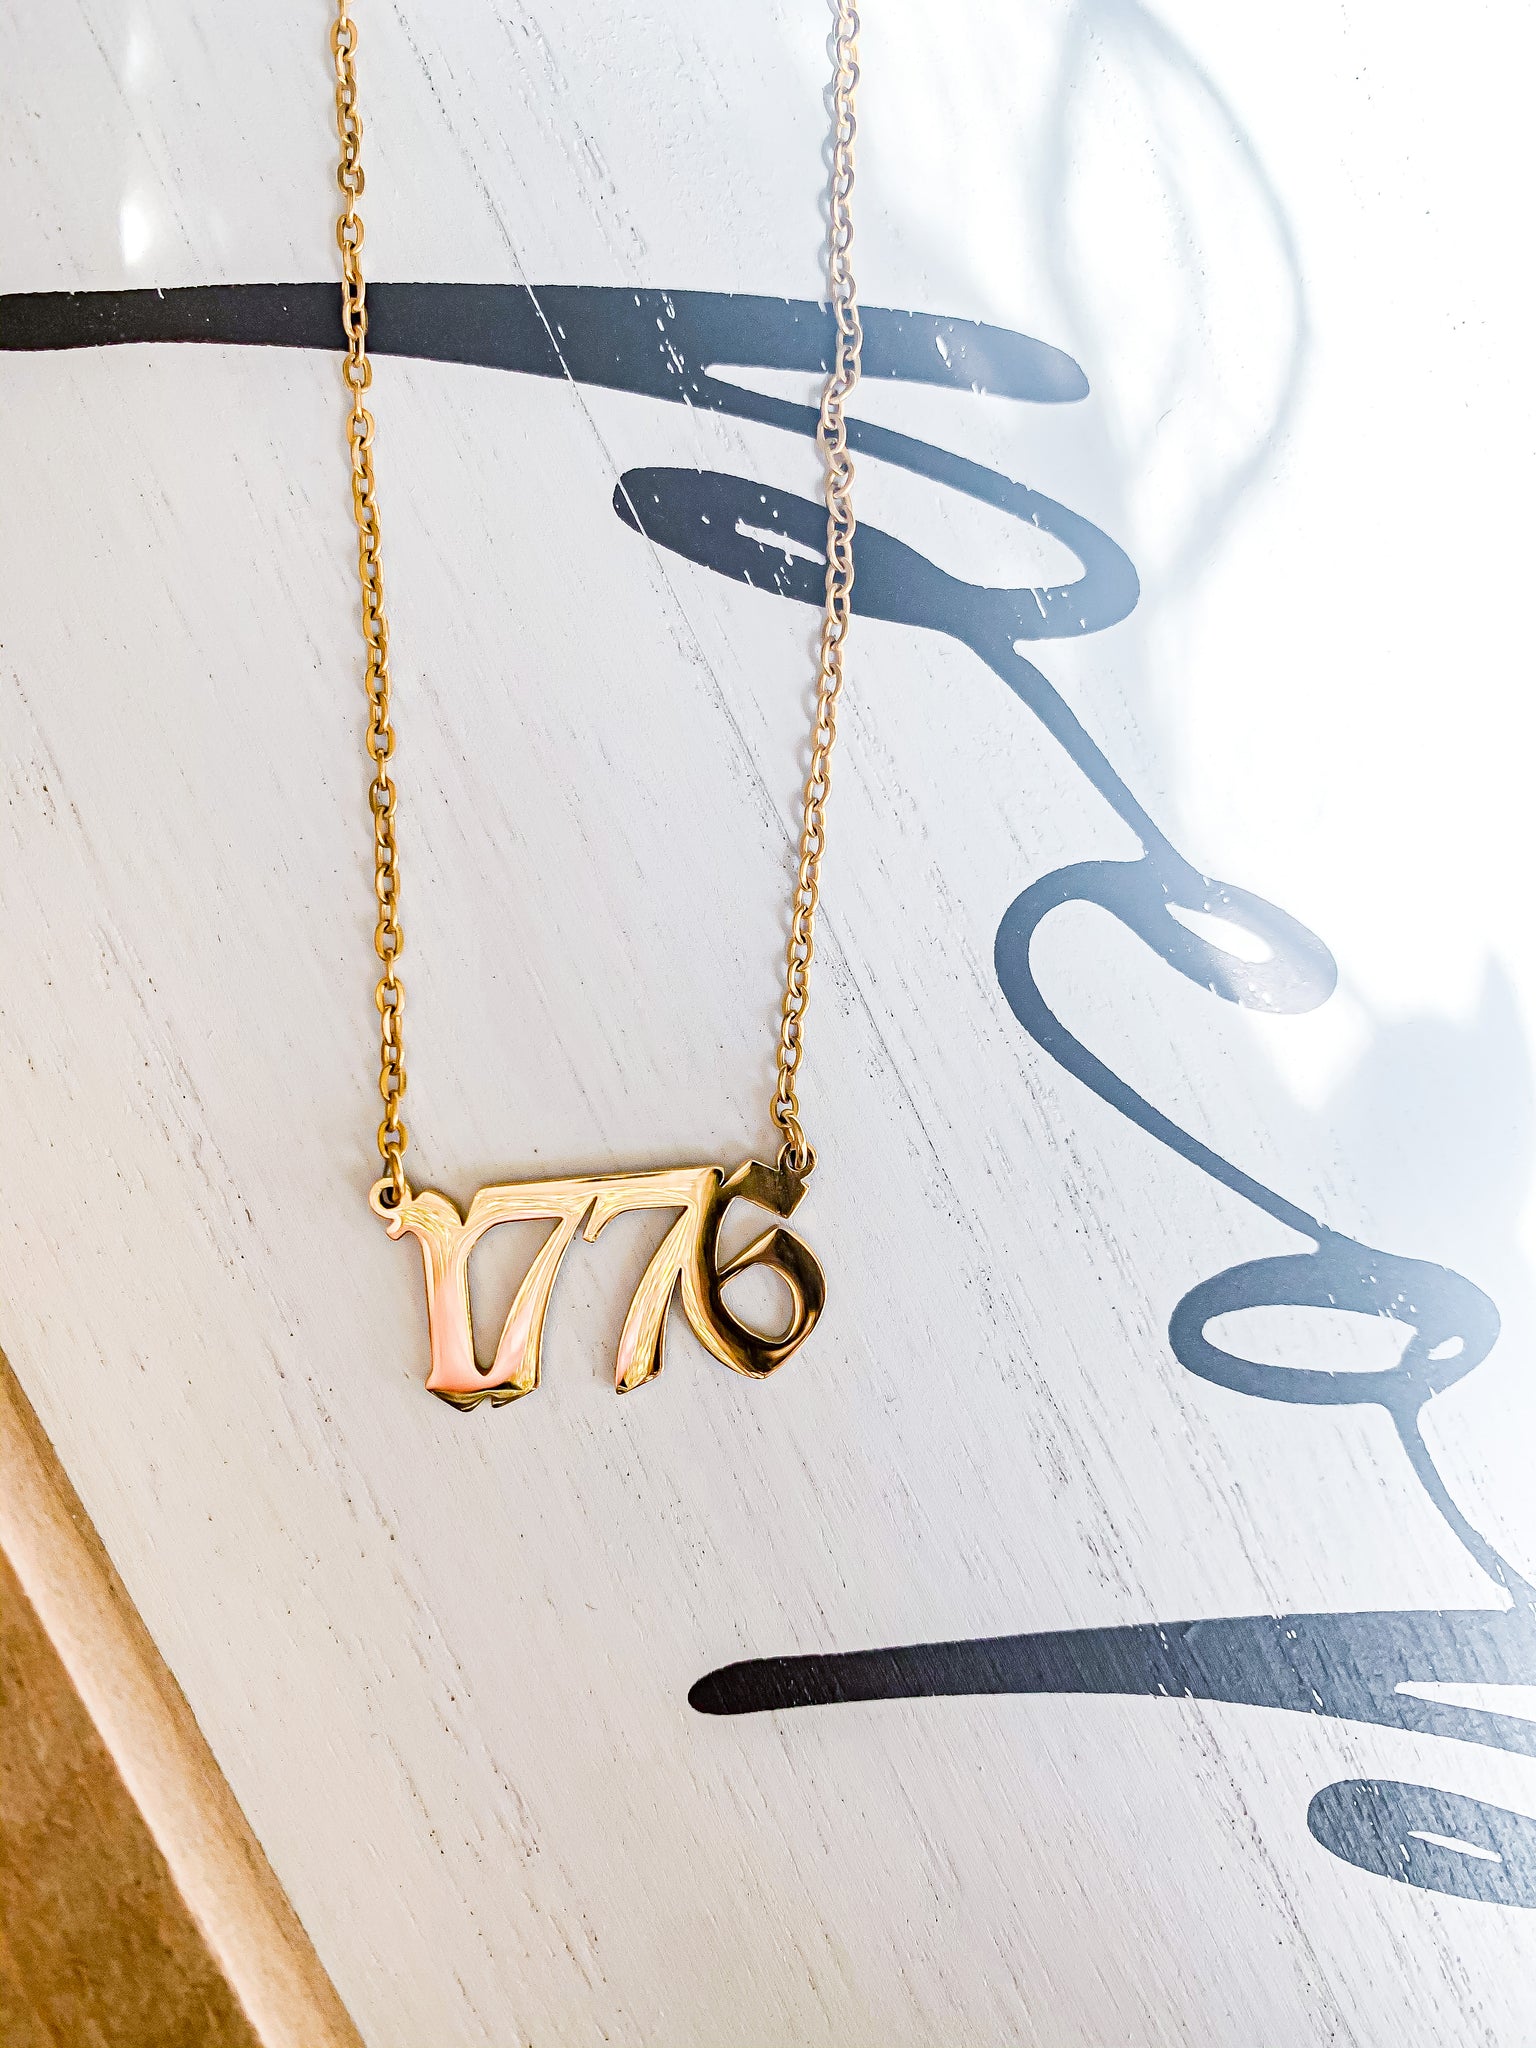 1776 Freedom Year Necklace